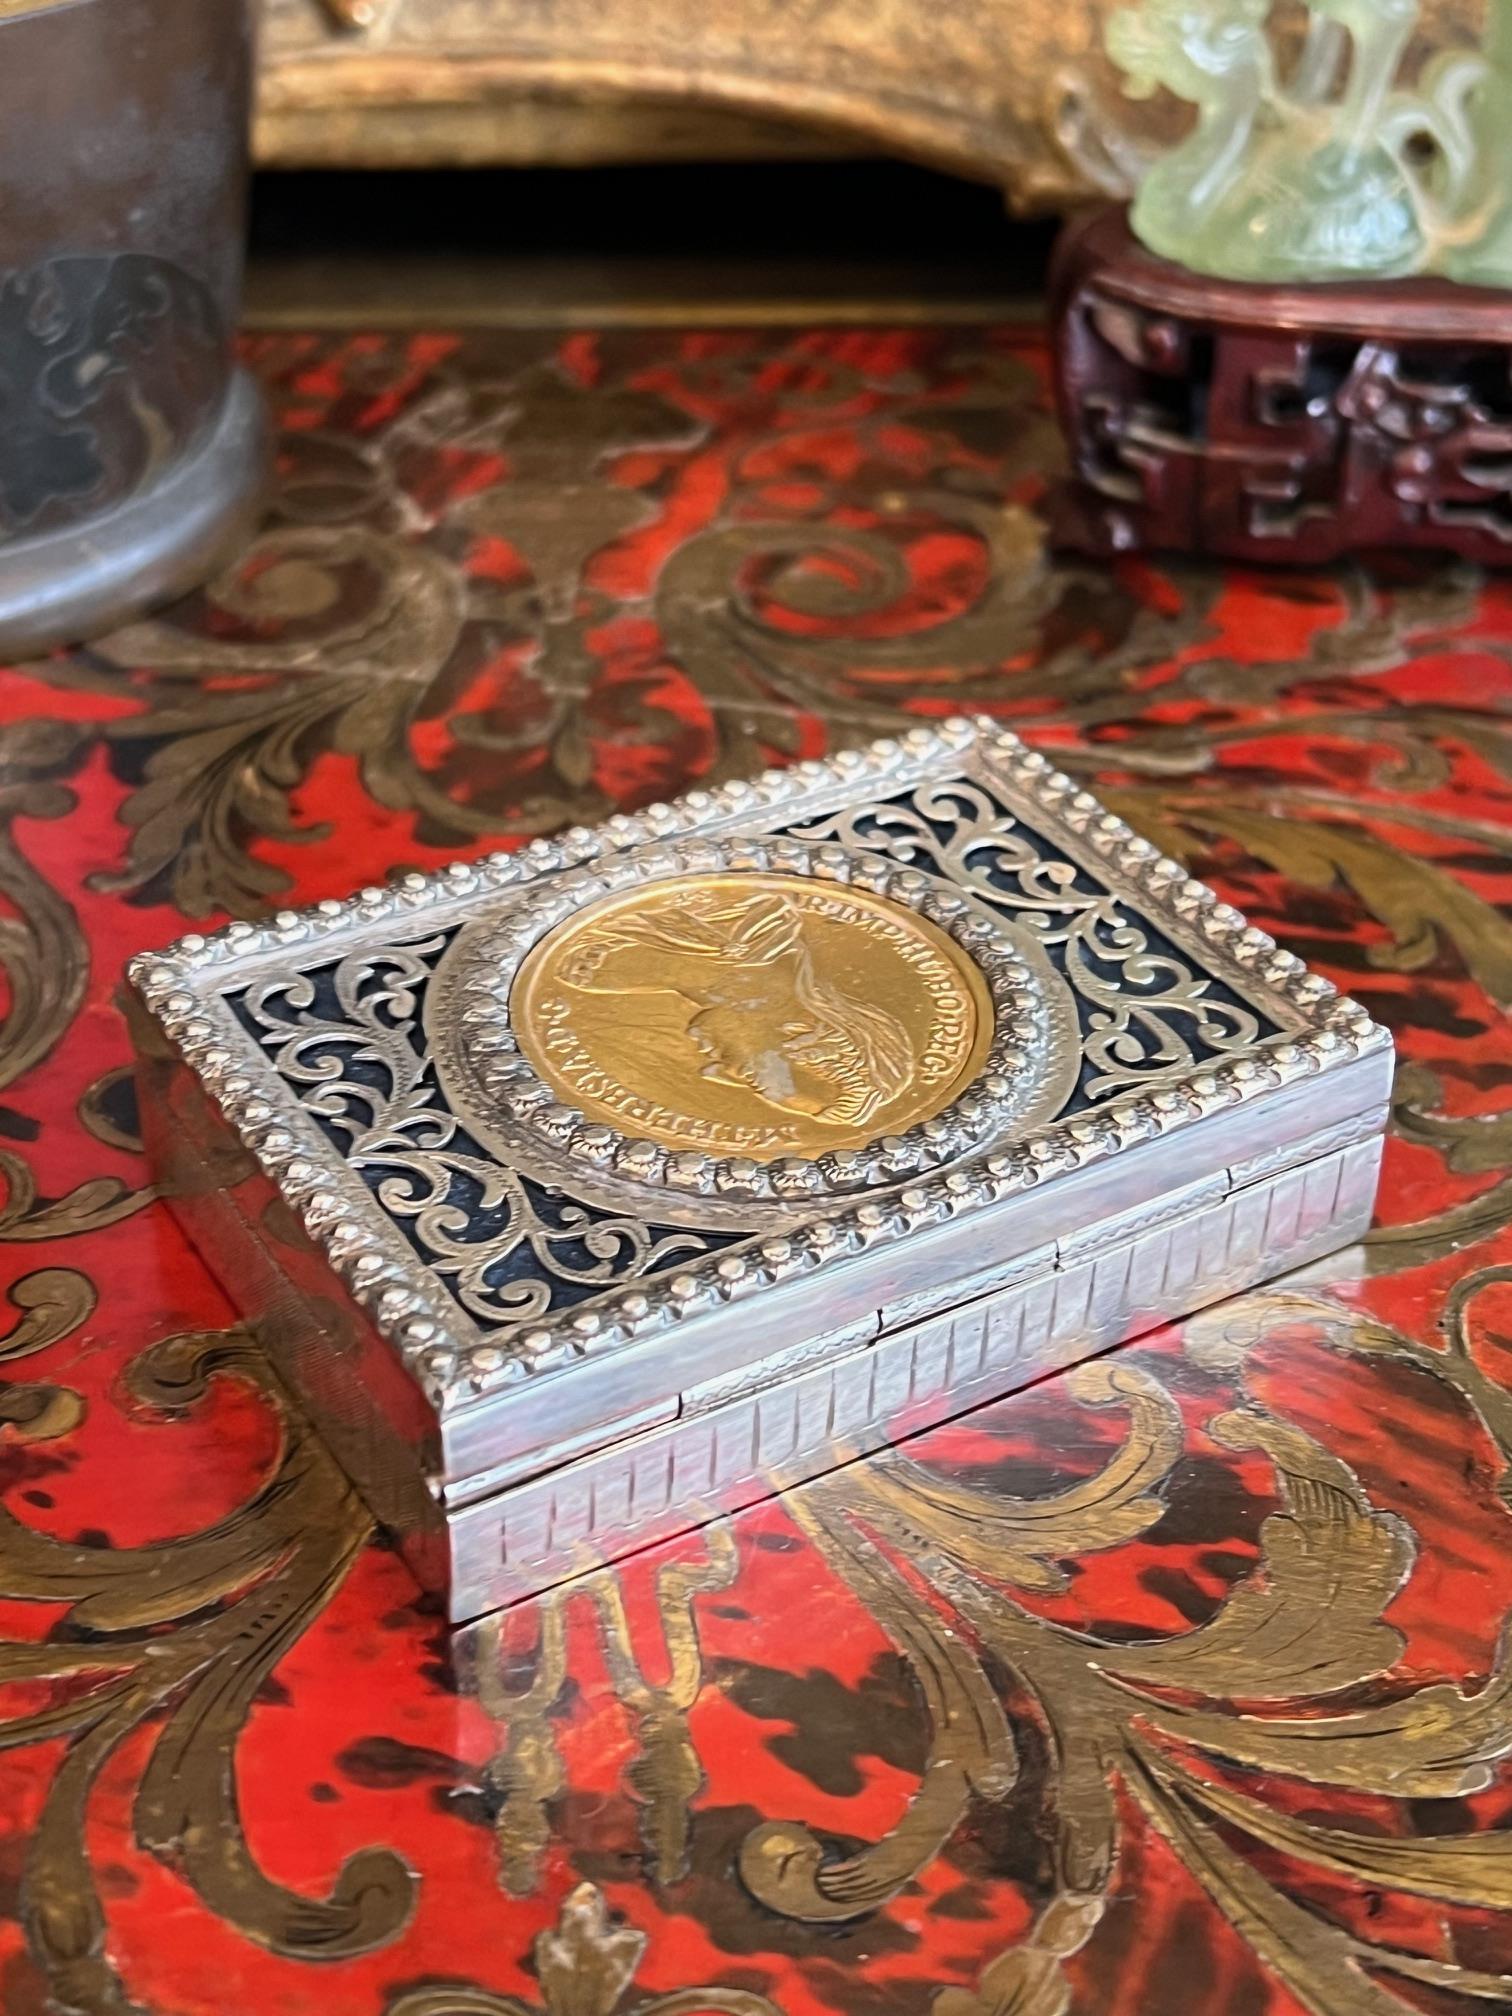 A RUSSIAN SILVER SNUFF BOX INLAID WITH A MARIA THERESA COIN - Image 2 of 6